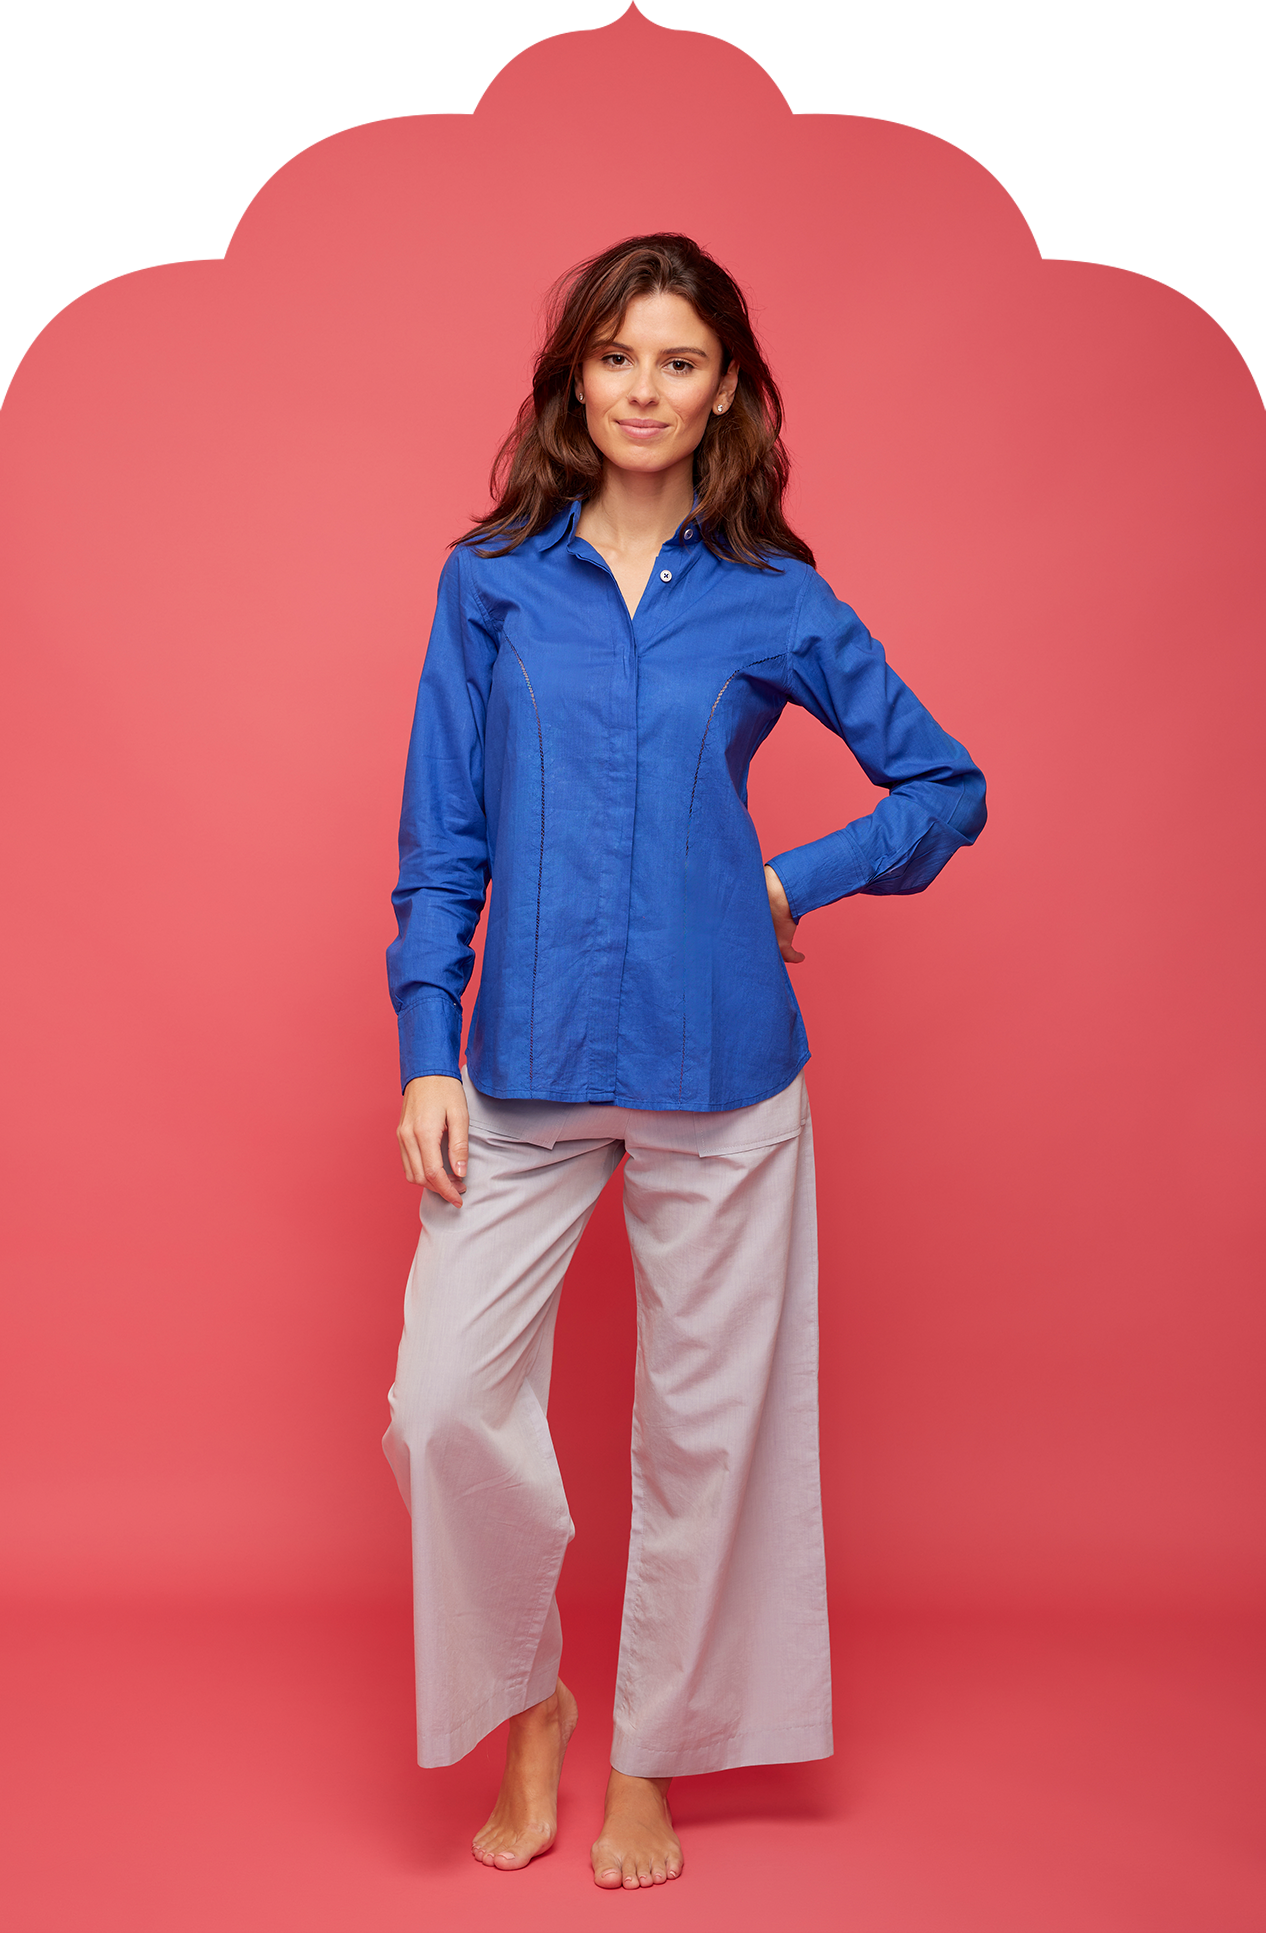 Women's Royal Blue Shirt with Jaali Detail